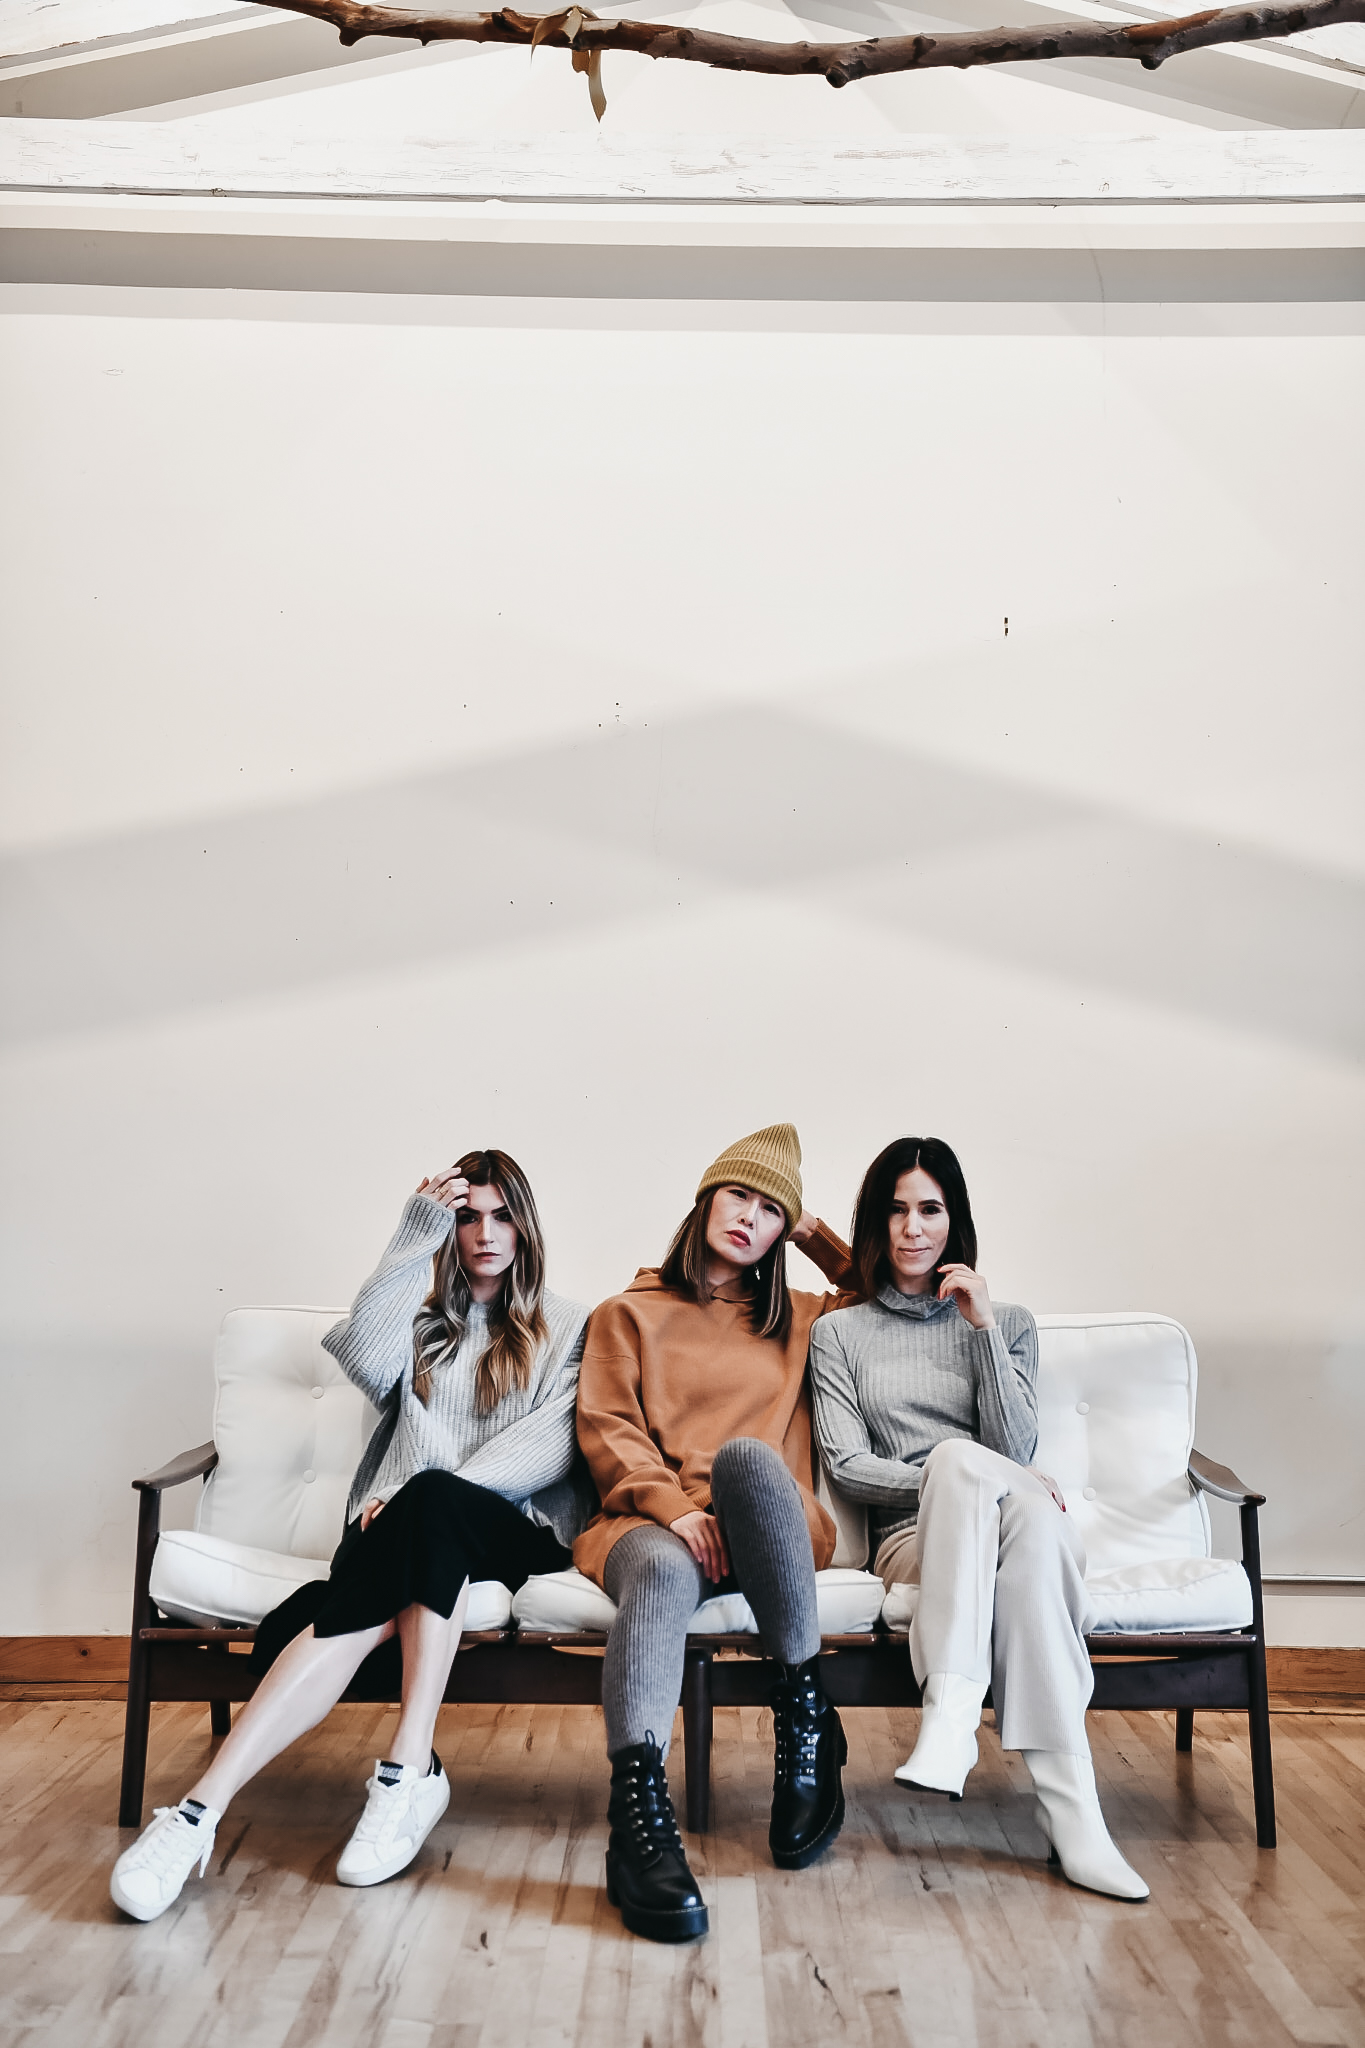 The Grey Edit - Cortney Bigelow Seattle Blogger - Stylelogue Trend Series - NAADAM Knitwear - February Styling - Sustainable Cashmere - Callus Pioneer Square